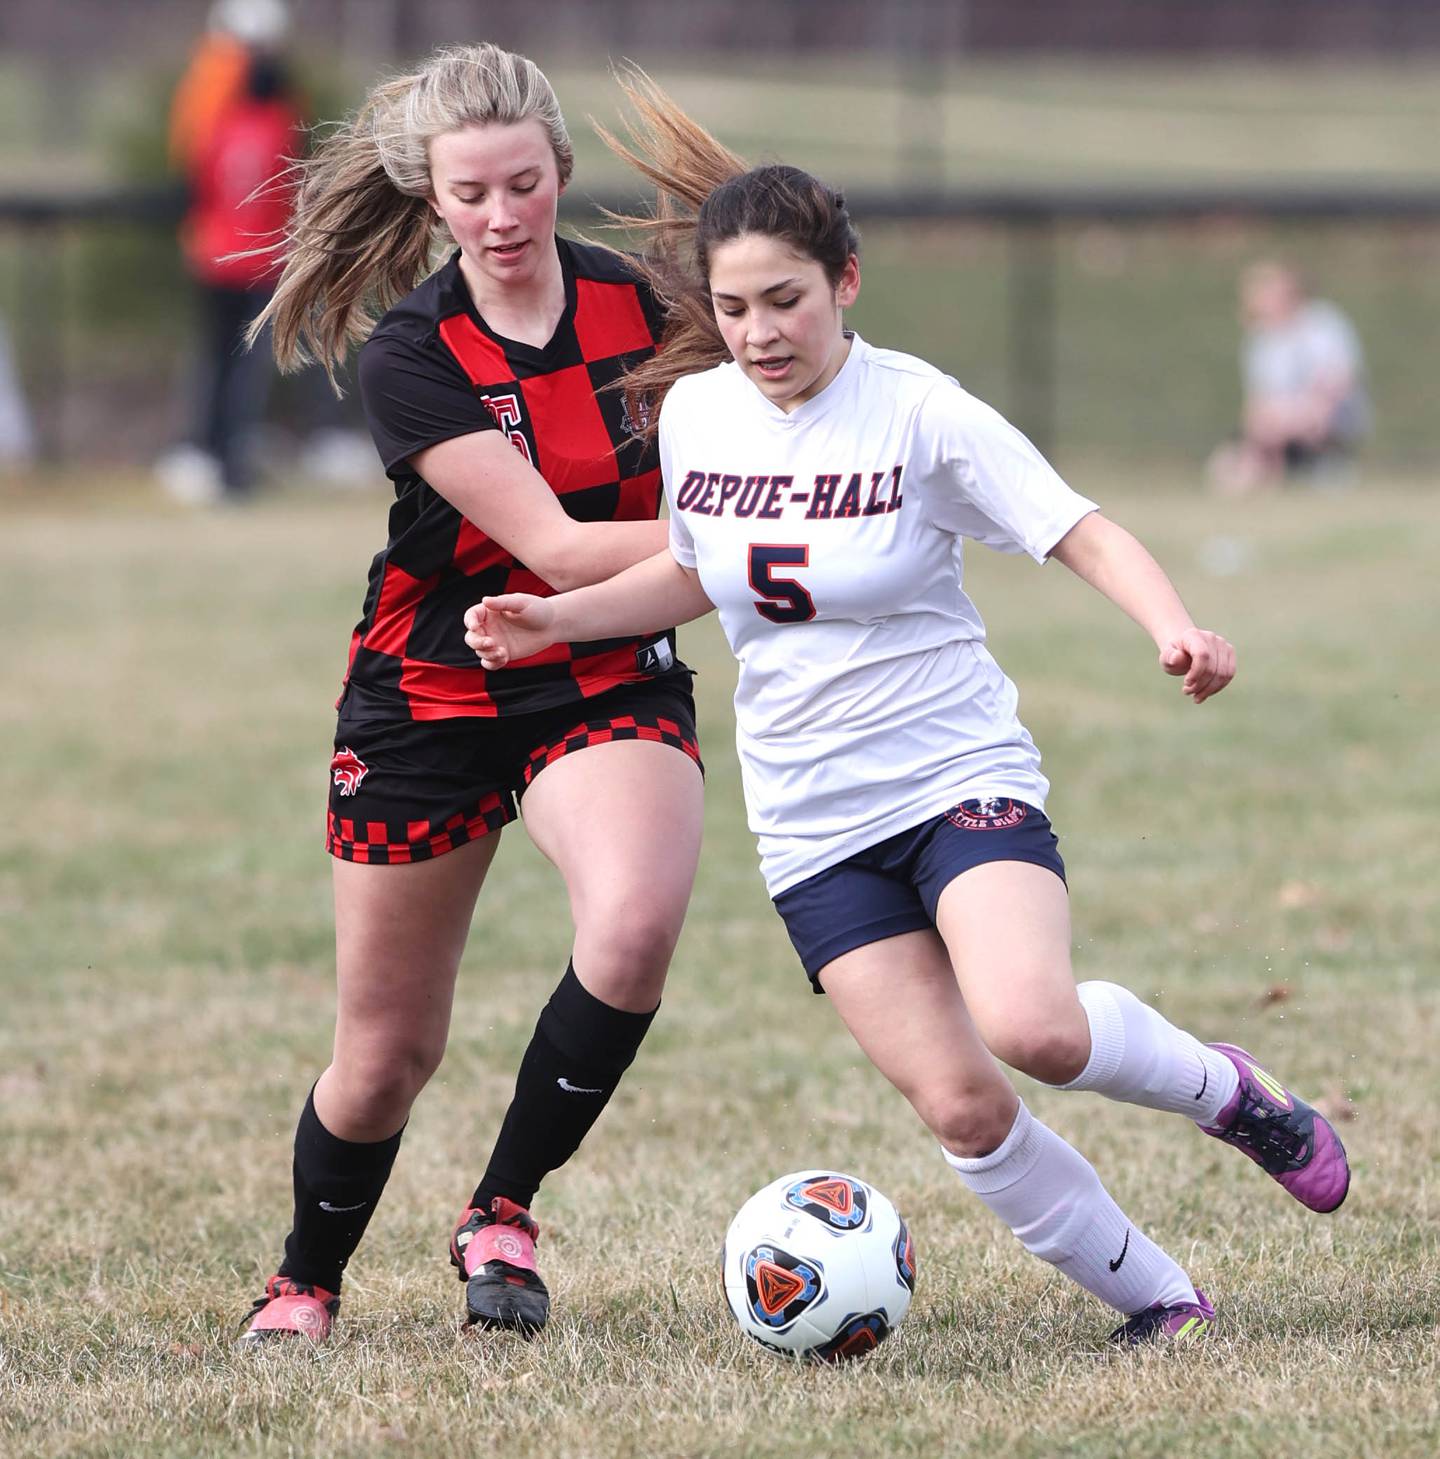 DePue's Veronica Fitzgerald and Indian Creek's Delia Diehl fight for possession during their game Tuesday, April 5, 2022, at Indian Creek Middle School in Waterman.